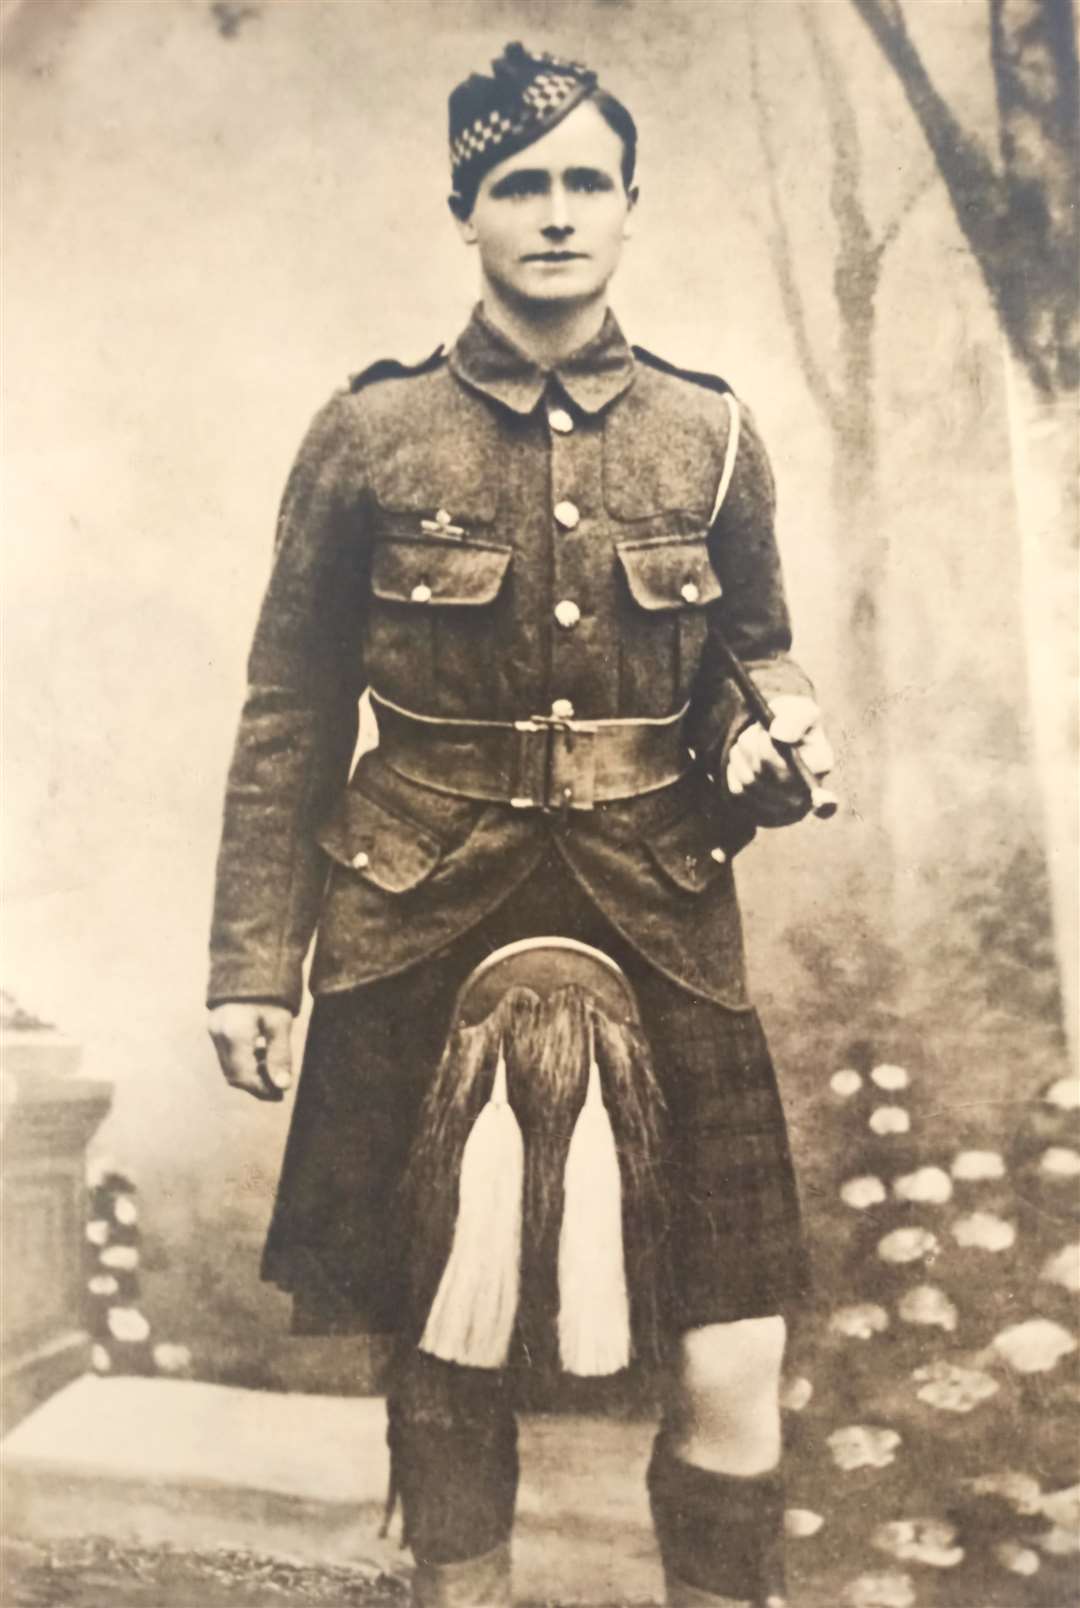 John Anderson McLeod was John's grandfather on his mother's side and died when she was very young as a result of an injury he received during WWI.